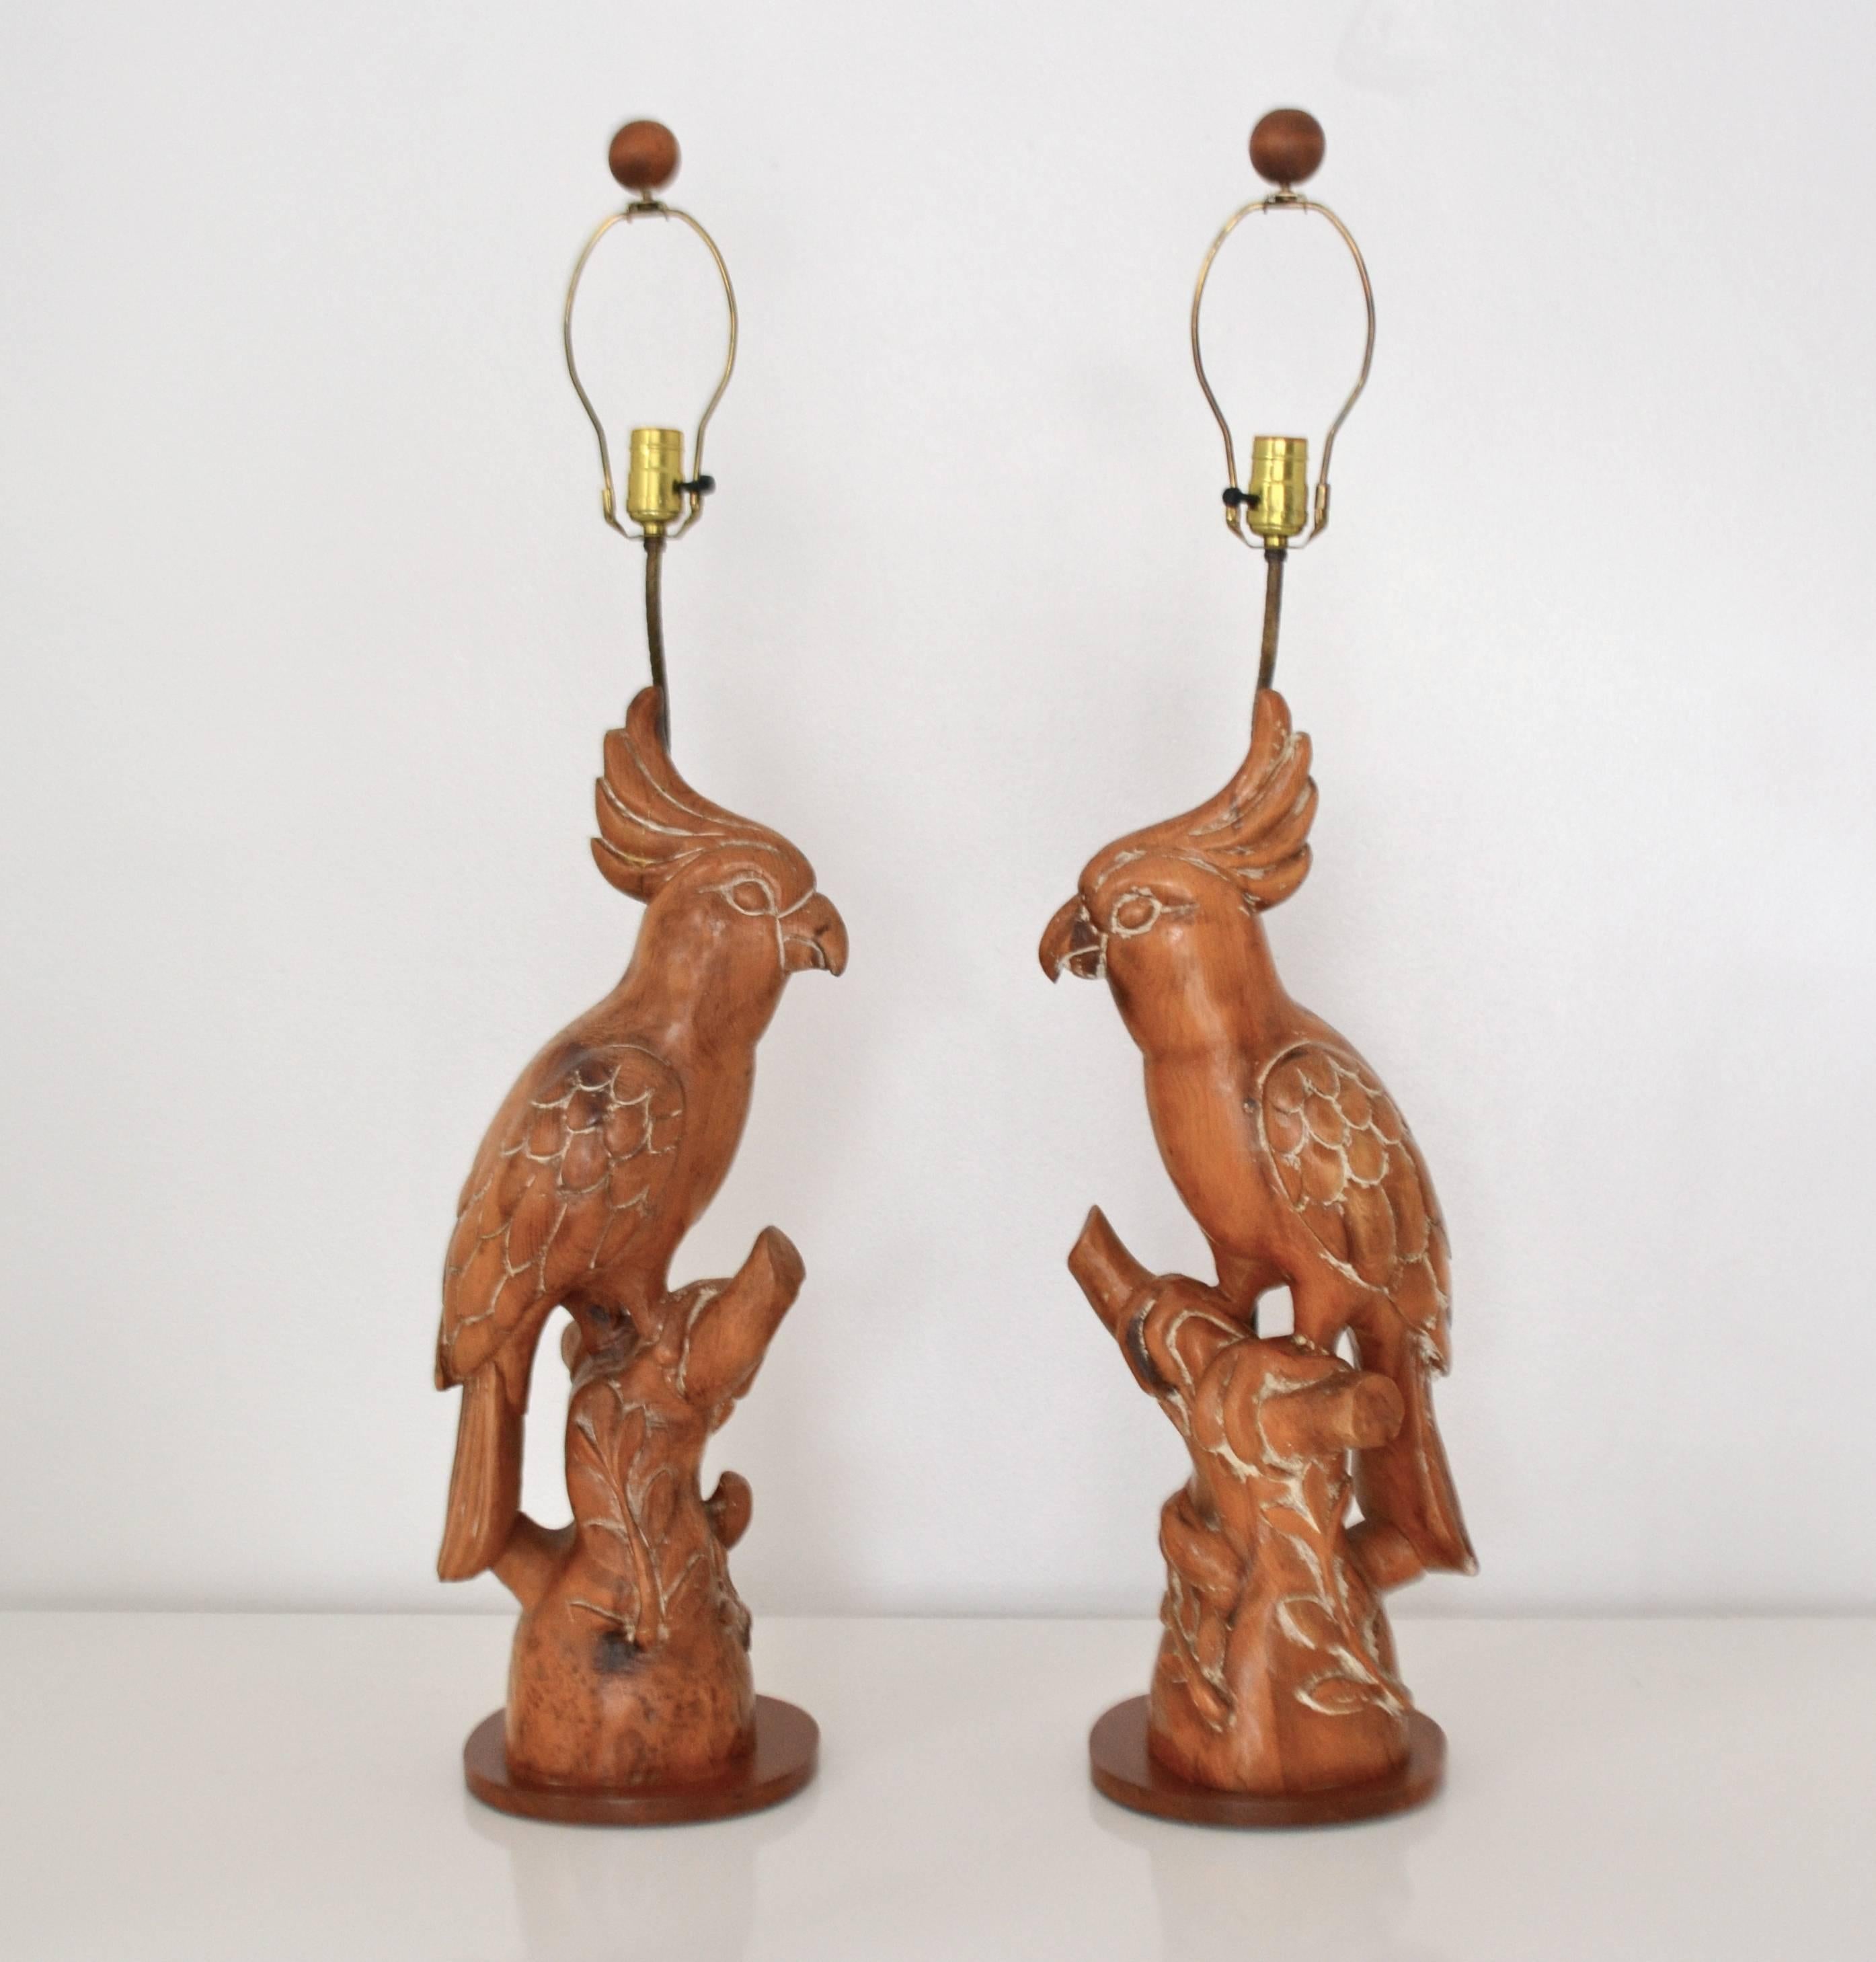 Striking pair of midcentury hand carved wooden parrot form table lamps, circa 1950s-1960s. These stunning artisan crafted sculptural lamps are wired with brass fittings. Shades not included.

Measurements: The overall height is 43